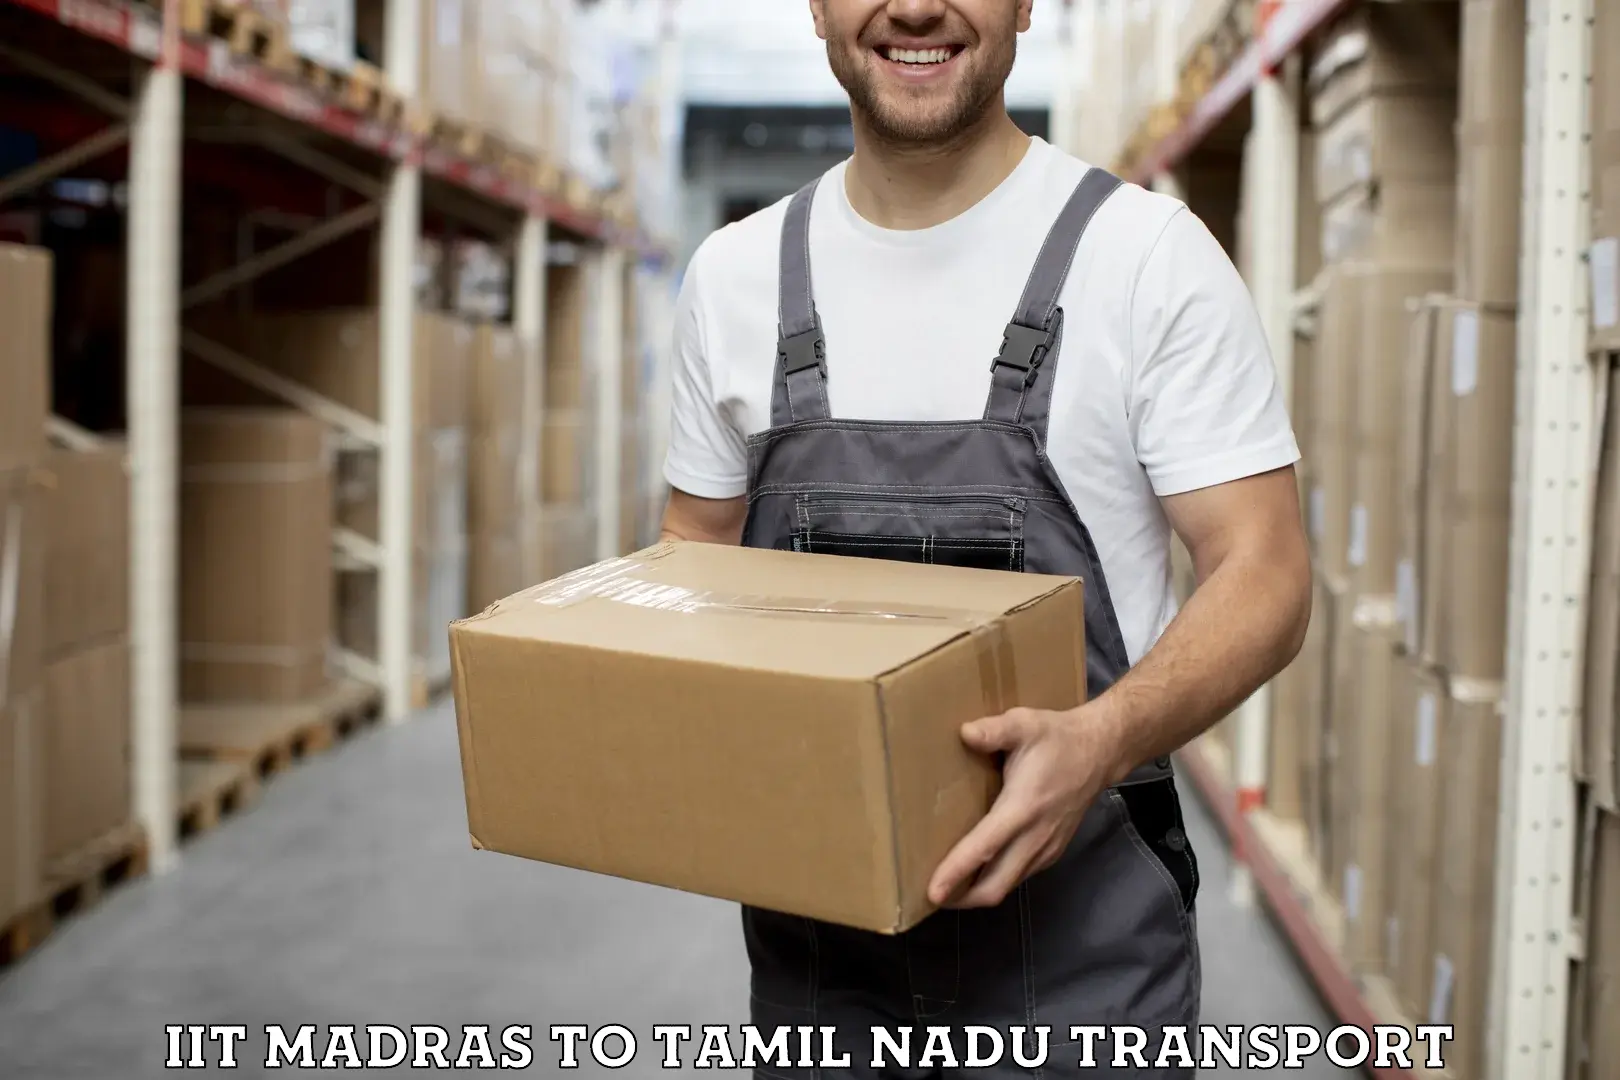 Door to door transport services IIT Madras to SRM Institute of Science and Technology Chennai